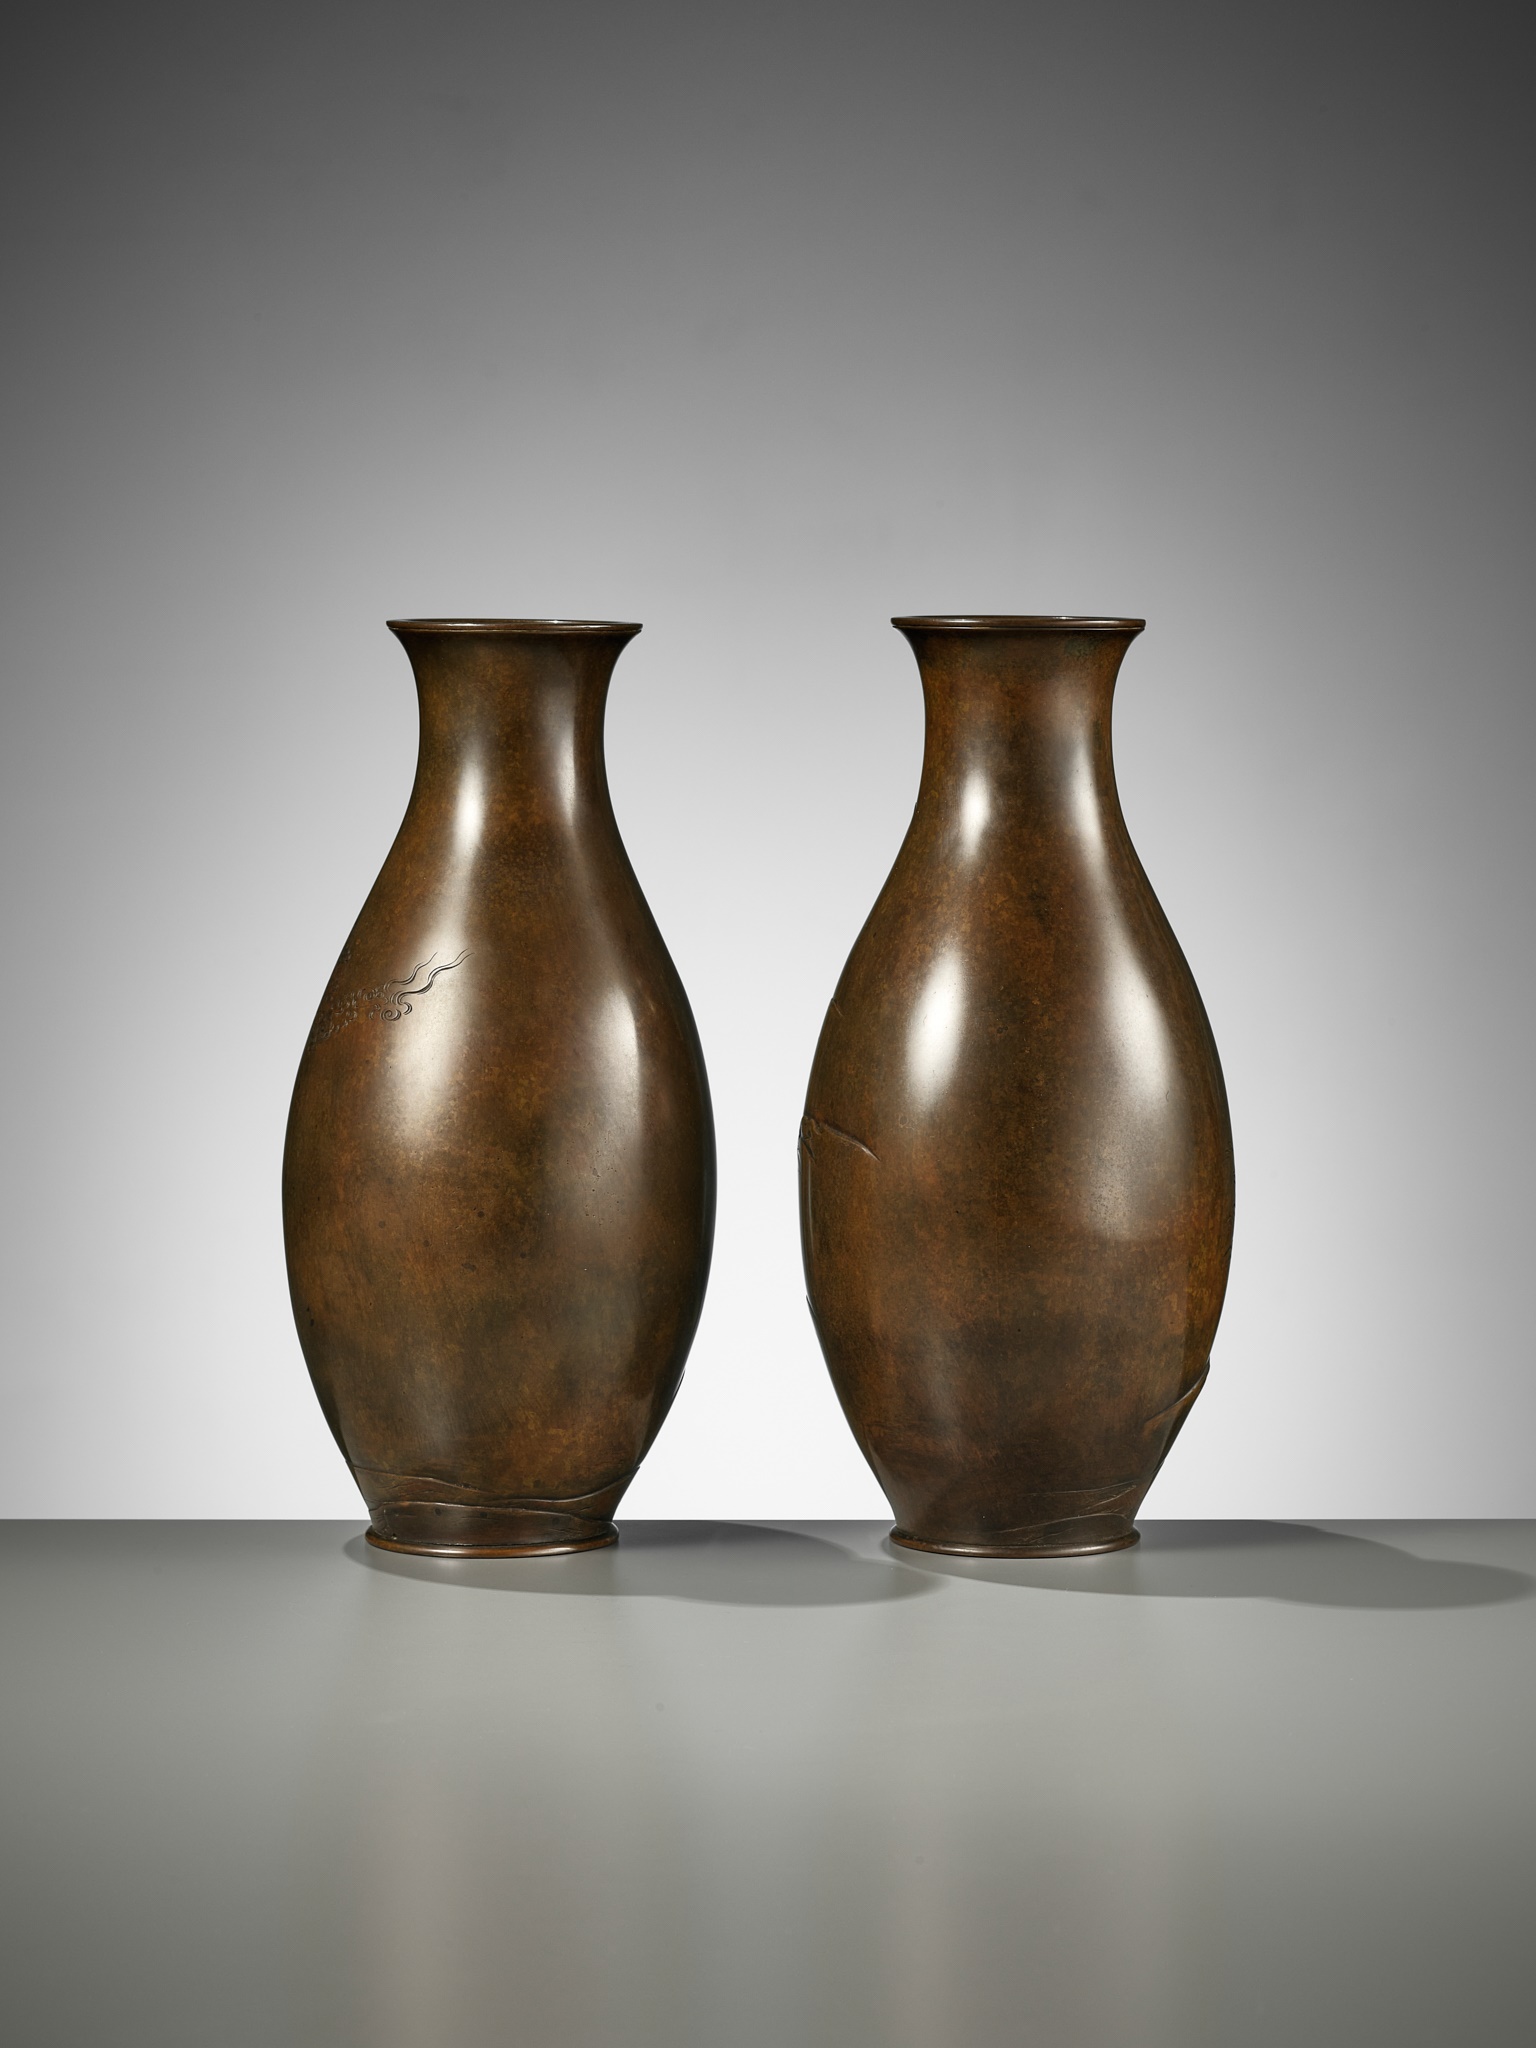 CHOMIN: A SUPERB PAIR OF INLAID BRONZE VASES WITH MINOGAME AND GEESE - Image 6 of 12